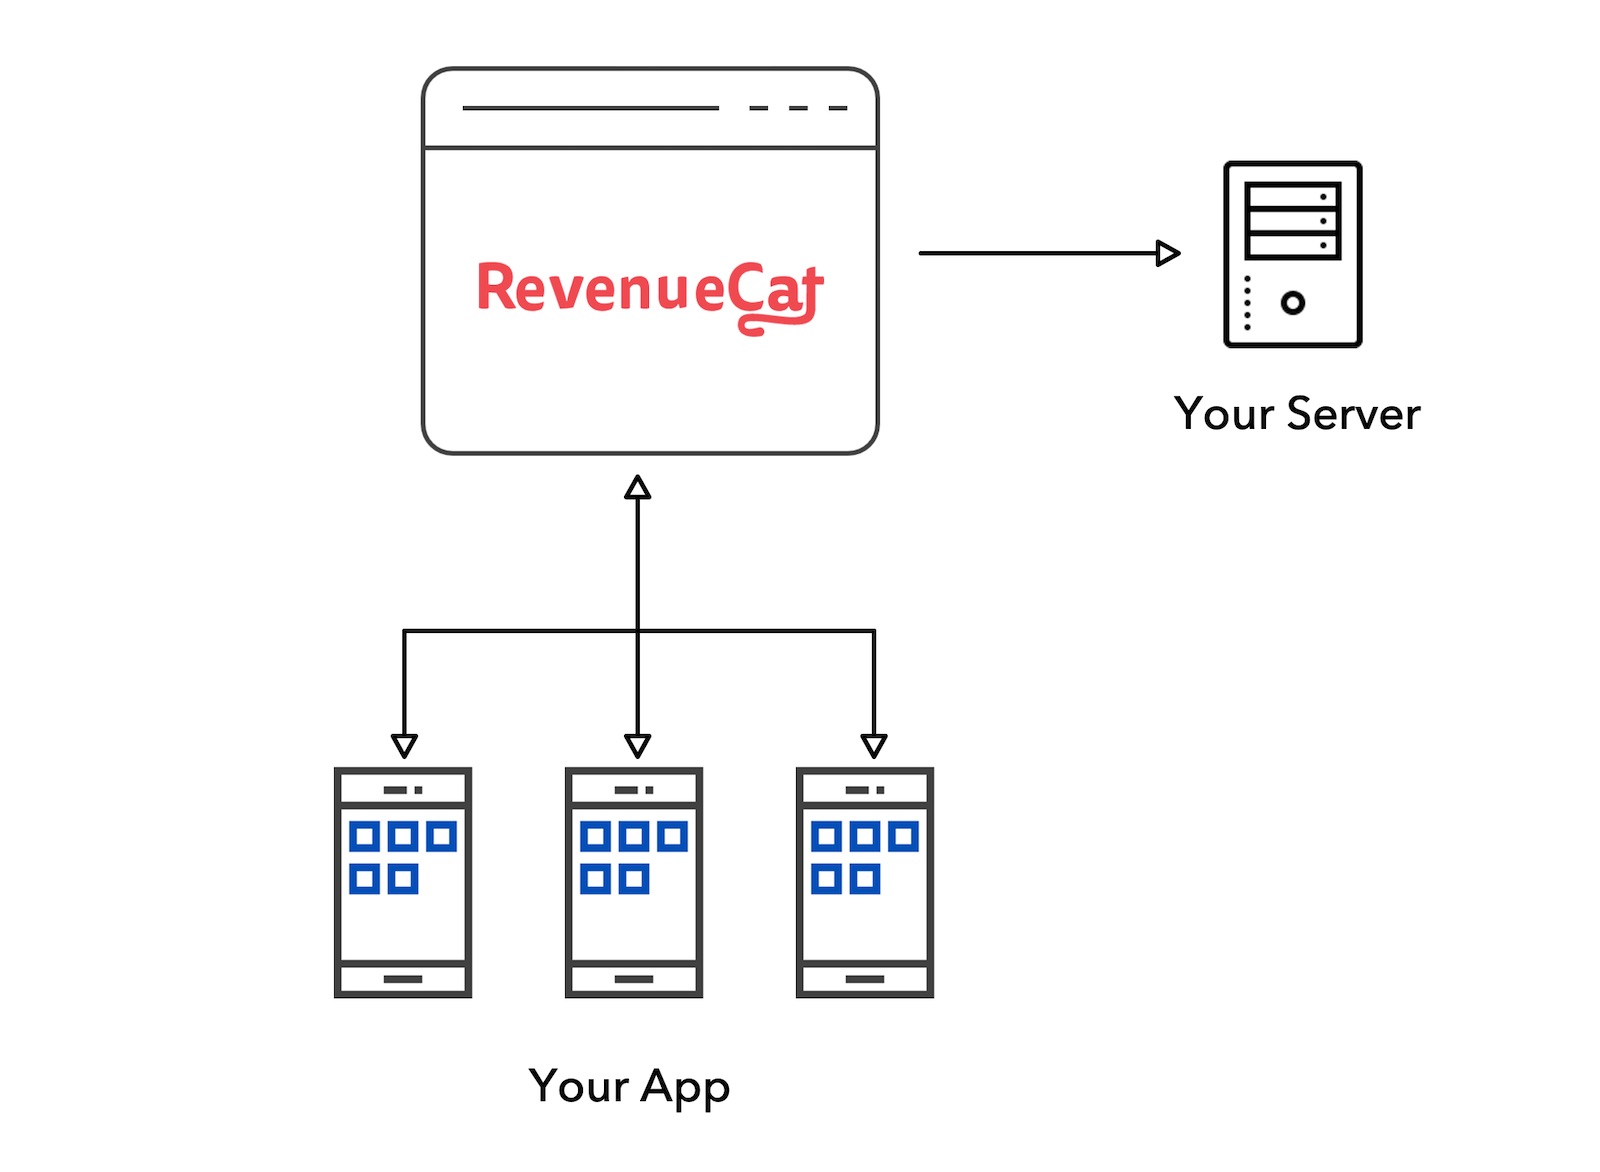 Architecture using RevenueCat's Purchases SDK together with your own back-end code.